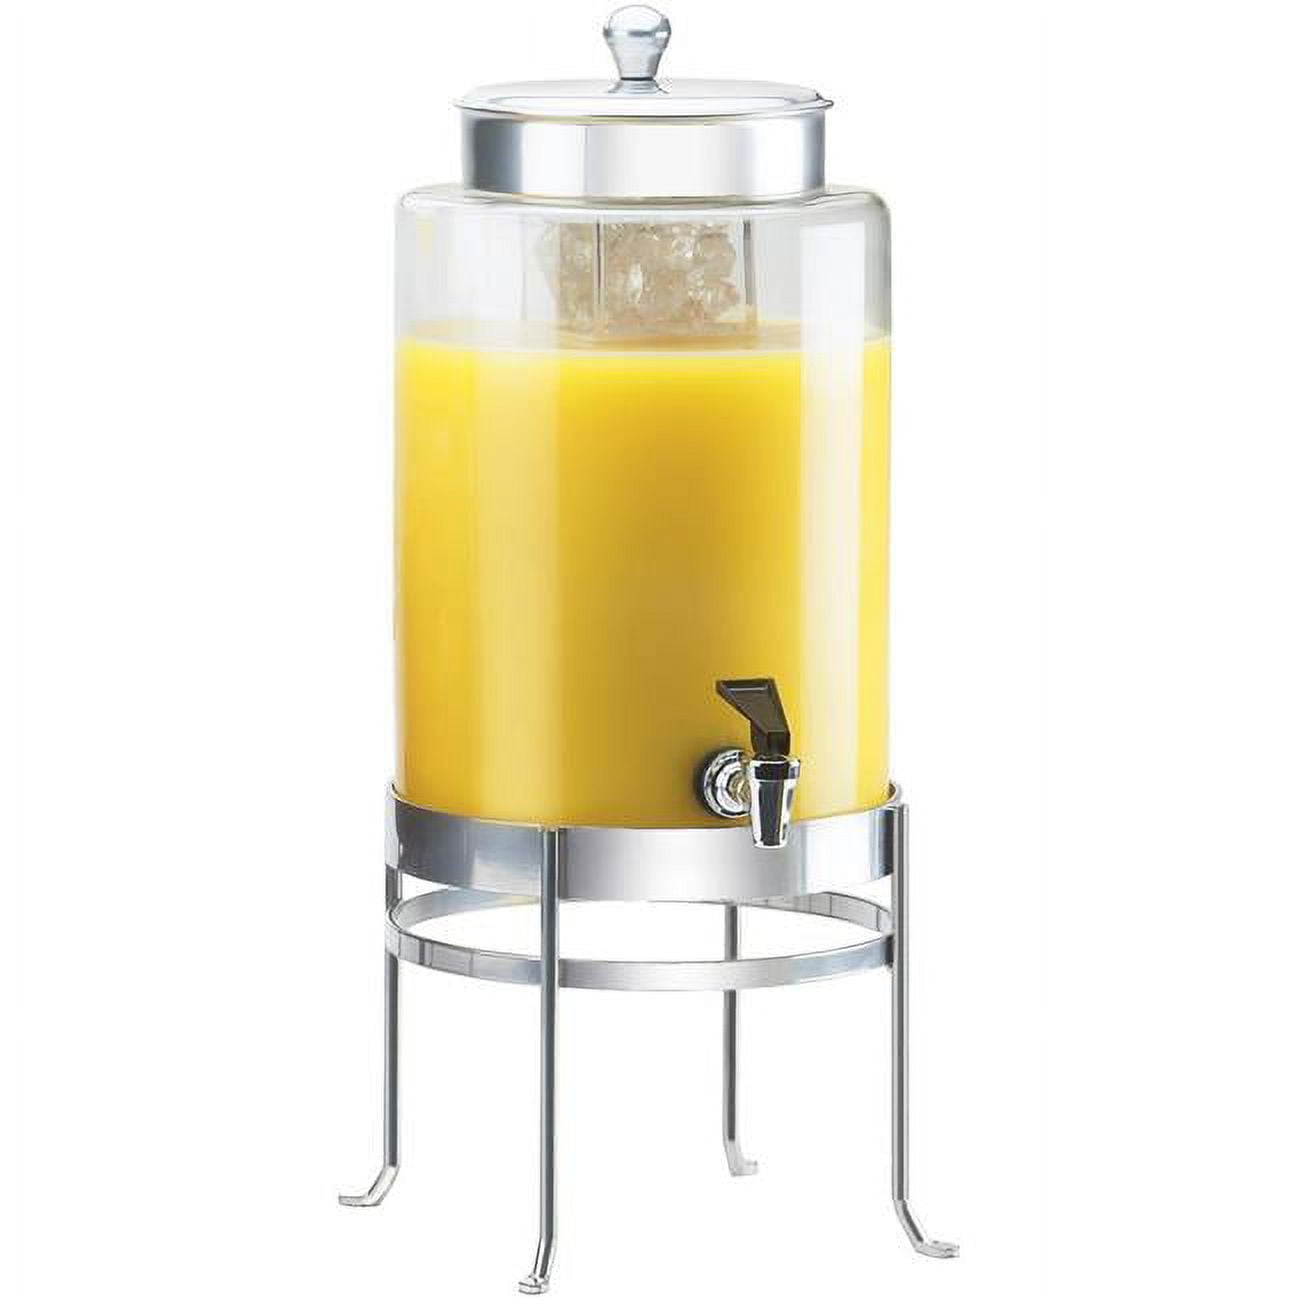 Picture of Cal Mil 1580-3INF-74 3 gal Silver Soho Glass Beverage Dispenser with Infusion Chamber - 10 x 12 x 24.5 in.